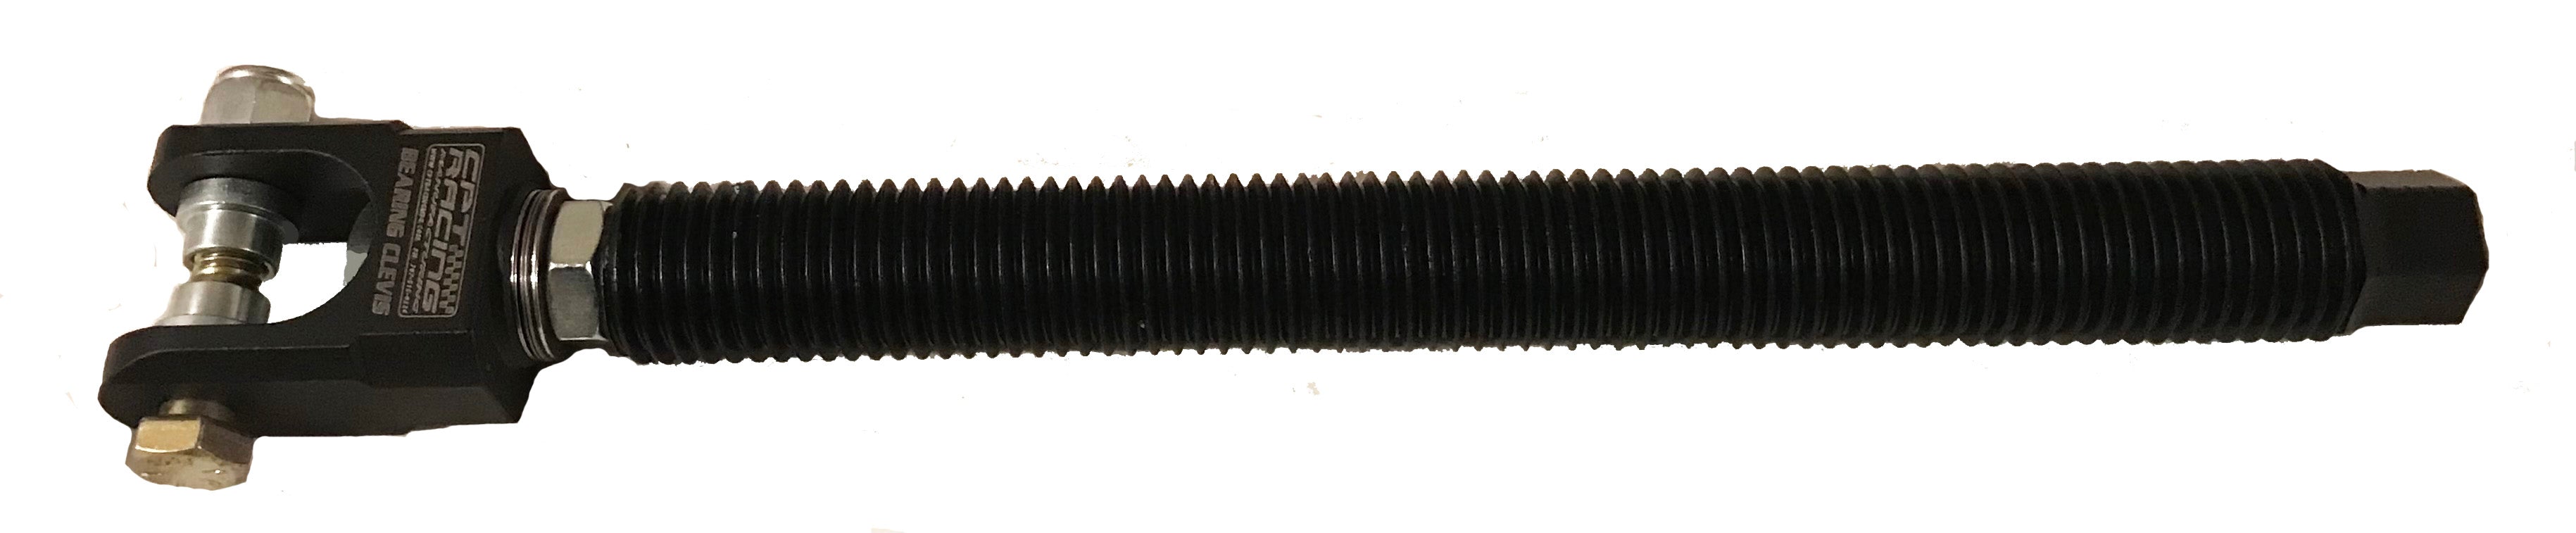 JACK SCREW BOLT 1” COARSE THREAD WITH BEARING SWIVEL CLEVIS